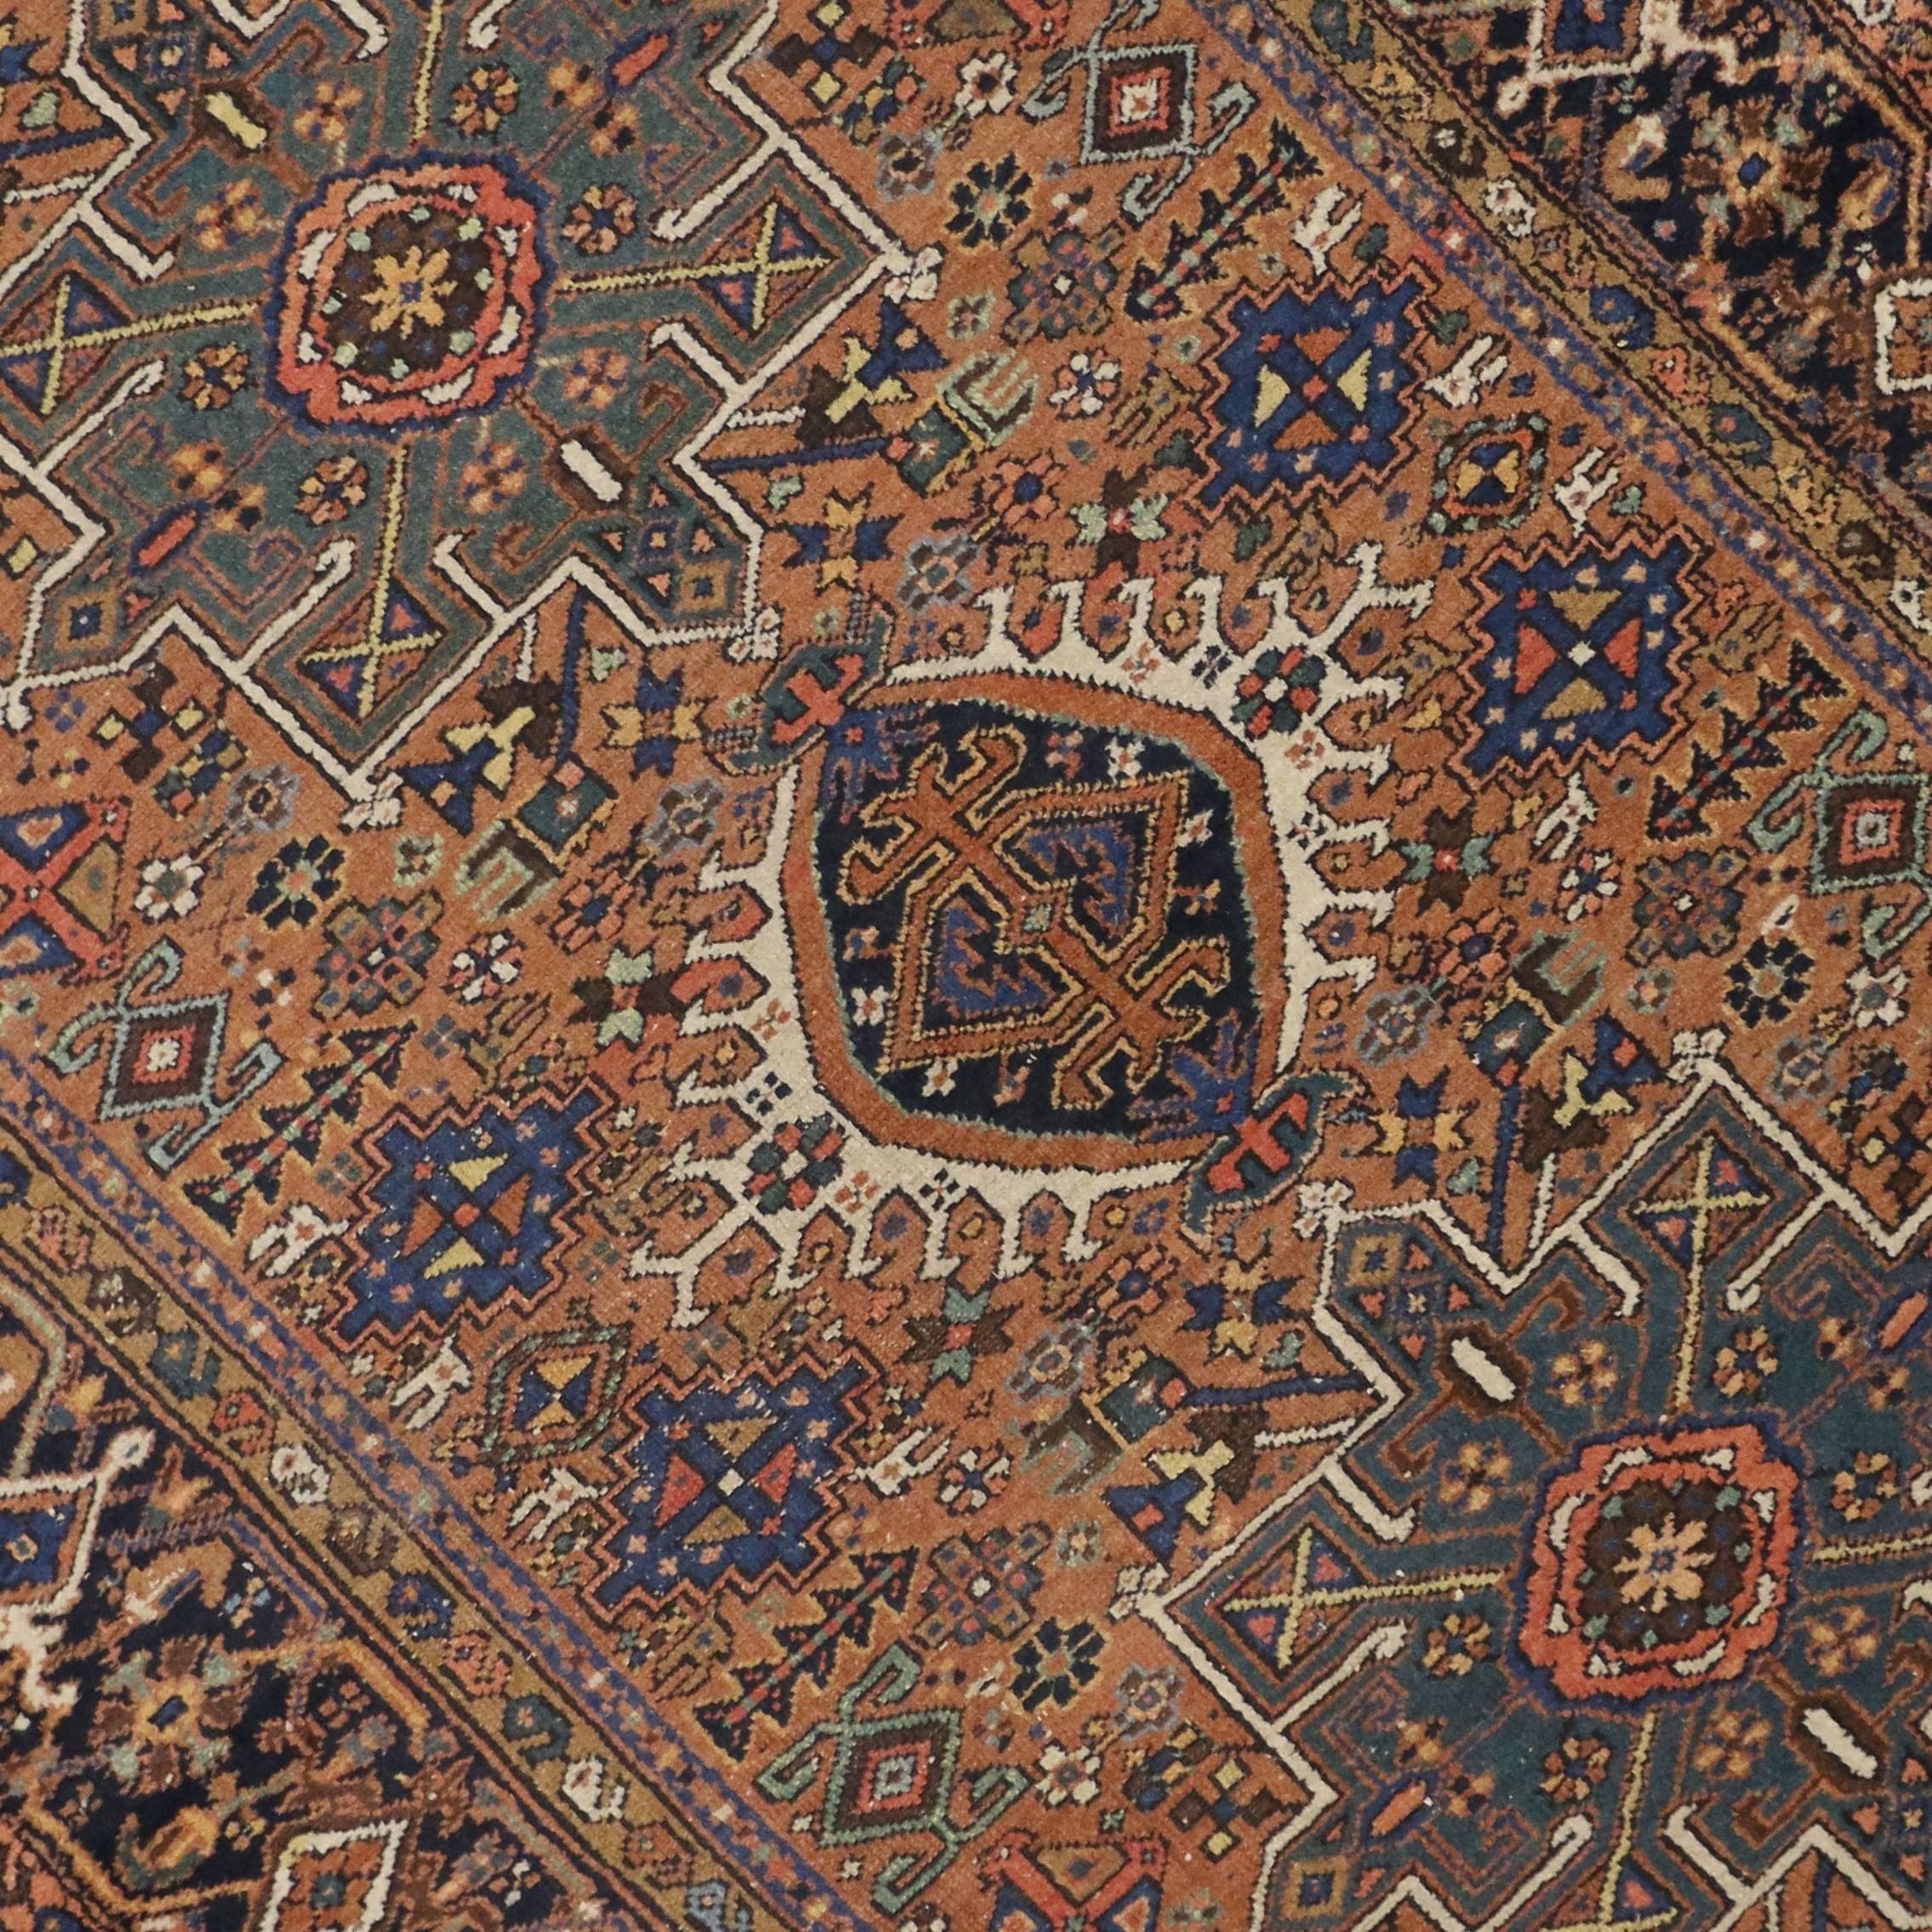 73308, antique Persian Heriz rug with tribal style. Full of character and stately presence, this antique Heriz Persian rug with modern tribal style showcases an extravagant geometric design rendered in warm colors of brown, rust, navy blue, slate